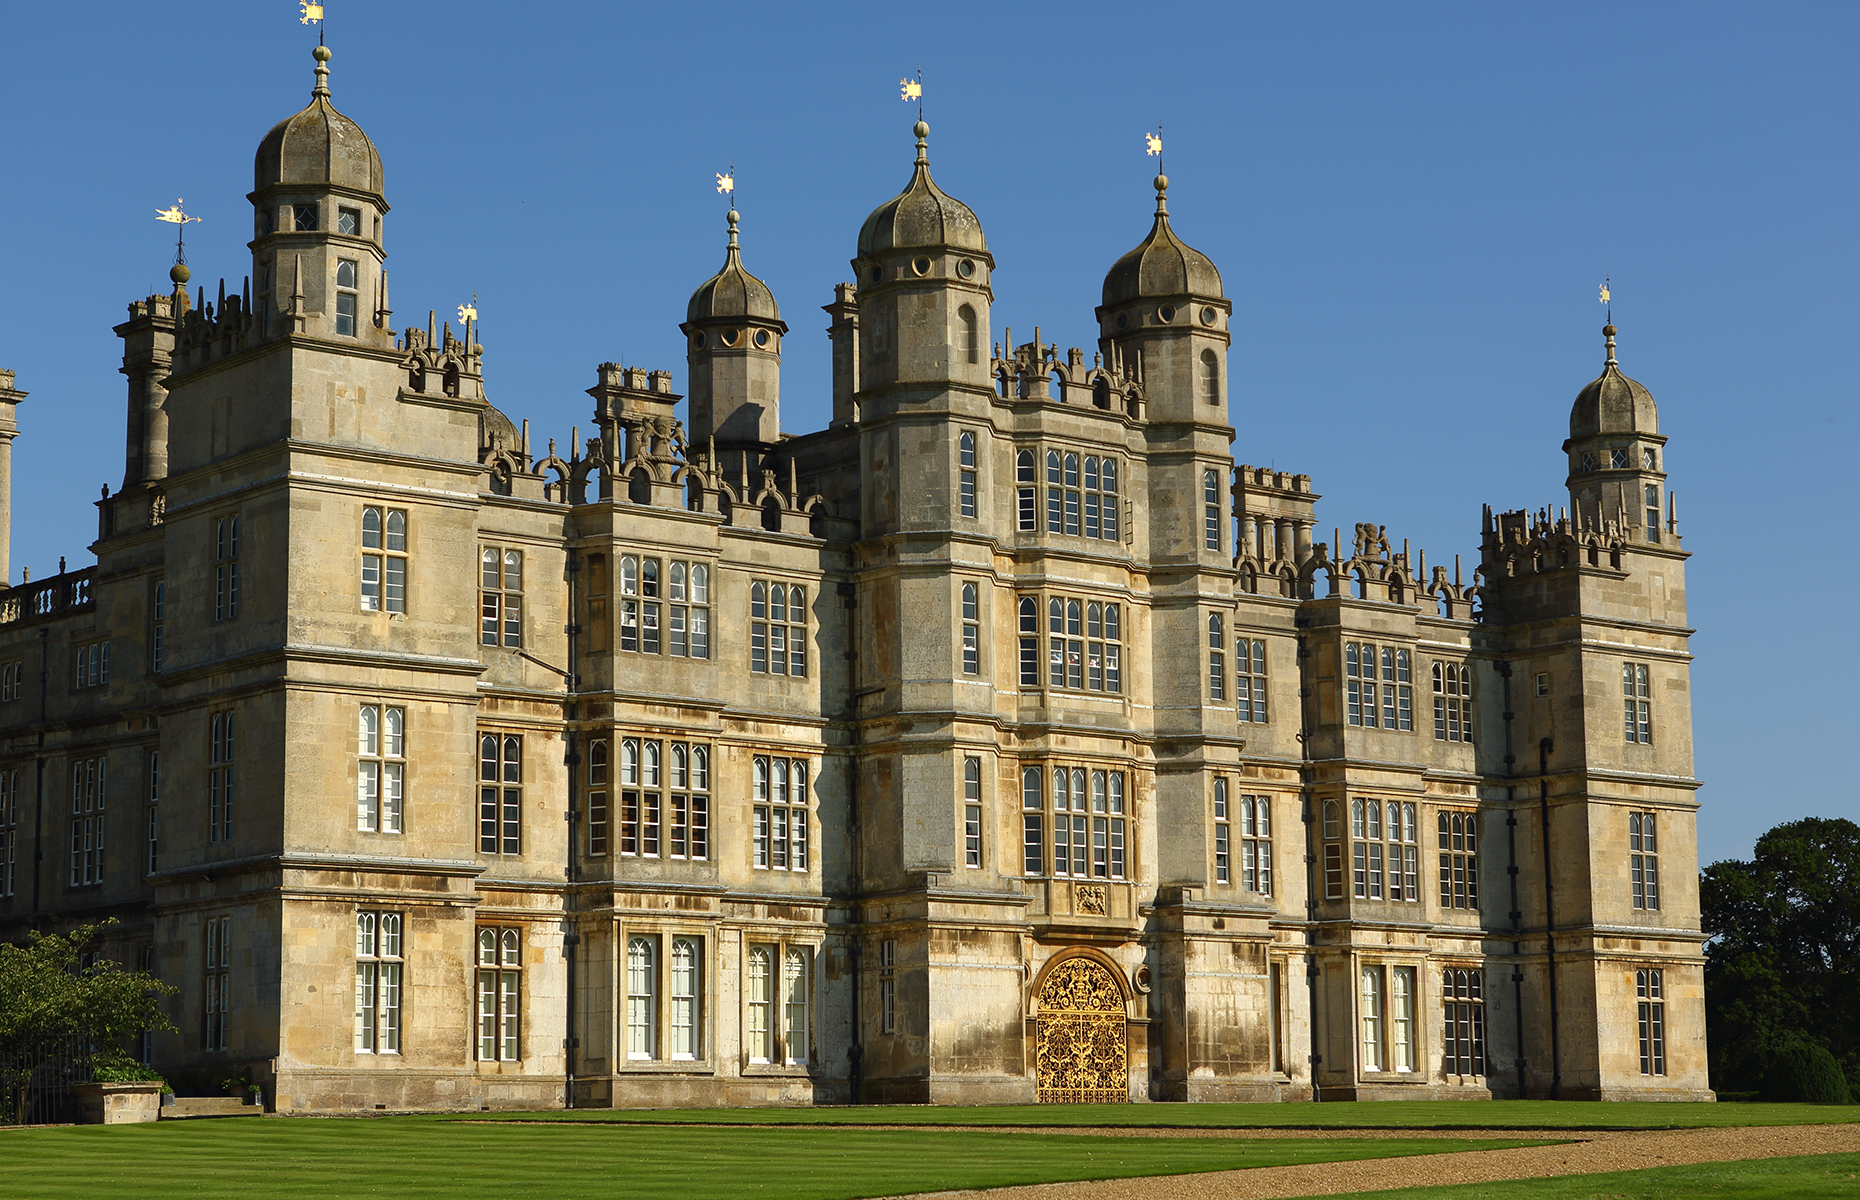 <p>Although it looks like a castle, the estate is technically classed as a 'prodigy house.' This is a term used to describe the opulent country houses built by courtiers during the Elizabethan period for the purposes of showing off the status of their owner, as well as the aim of hosting the monarch herself.</p>  <p>Cecil dominated Elizabethan politics, with detailed knowledge of political movements across the country. It is said that '<a href="https://www.gale.com/intl/essays/stephen-alford-politicians-statesmen-ii-william-cecil-lord-burghley">nobility meant the world to him</a>' and he longed for Queen Elizabeth to know how much he appreciated his place in her court. </p>